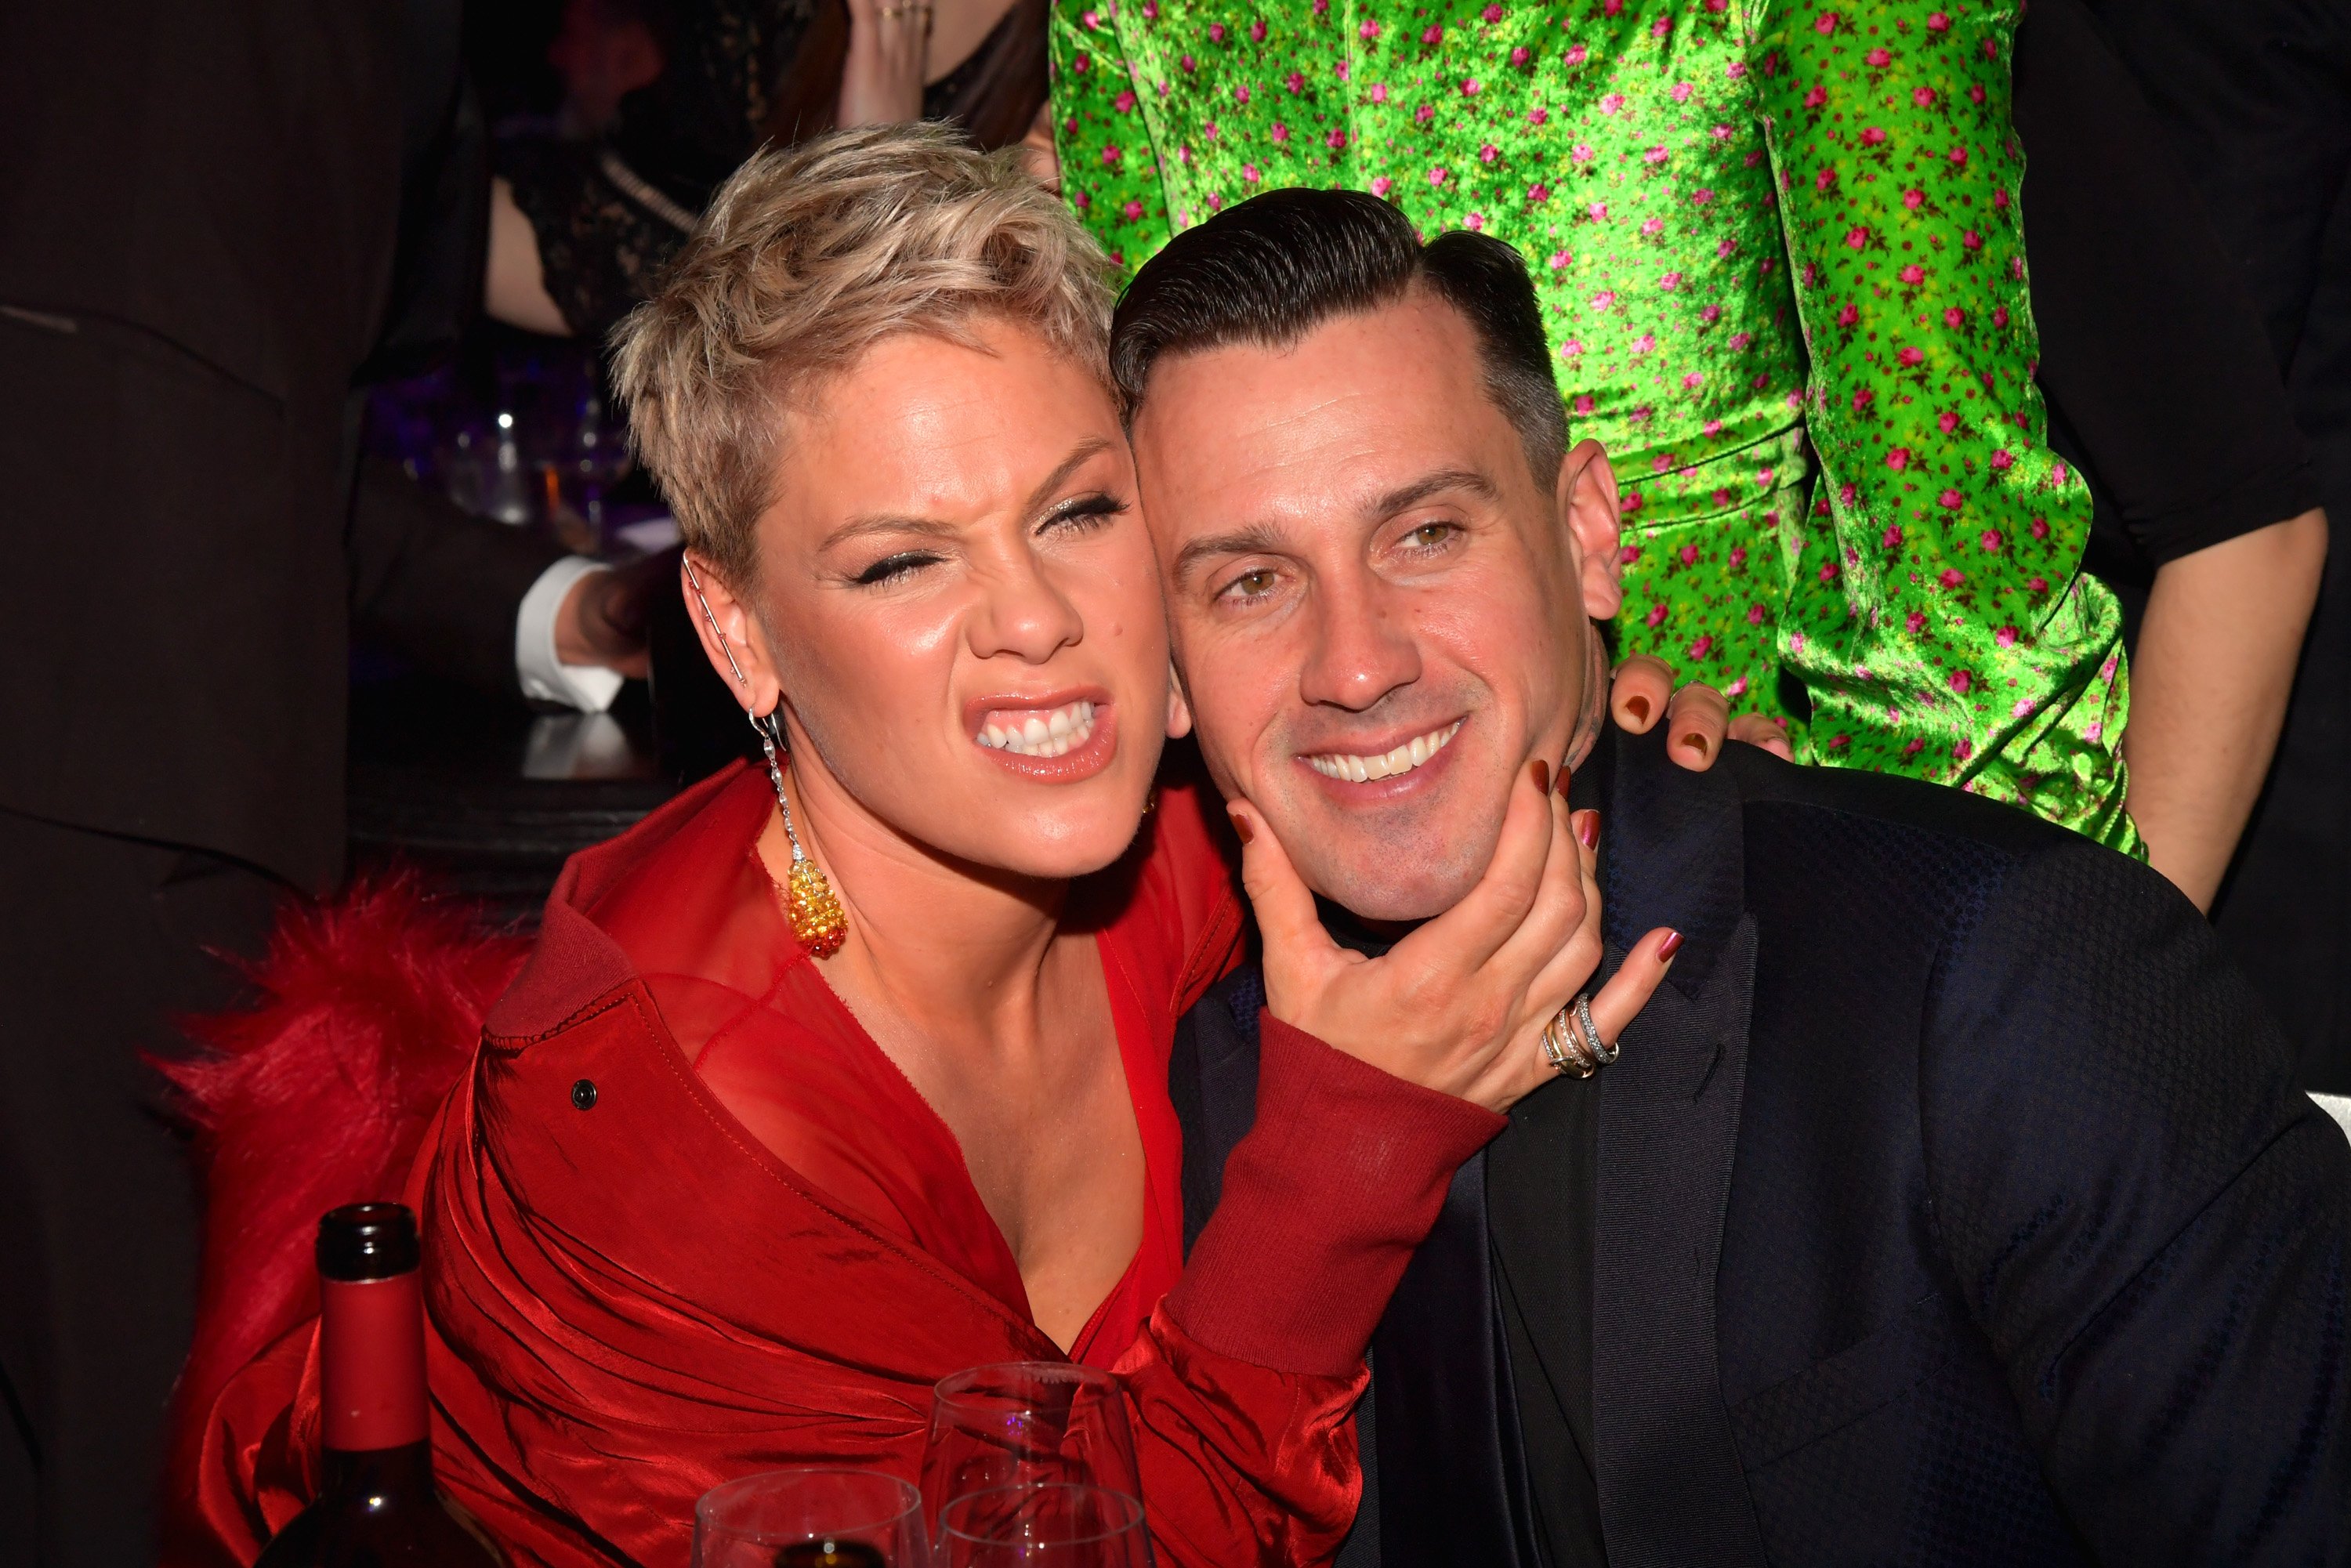 Pink and Carey Hart pictured at Clive Davis and Recording Academy Pre-GRAMMY Gala, in New York, 2018. | Photo: Getty Images